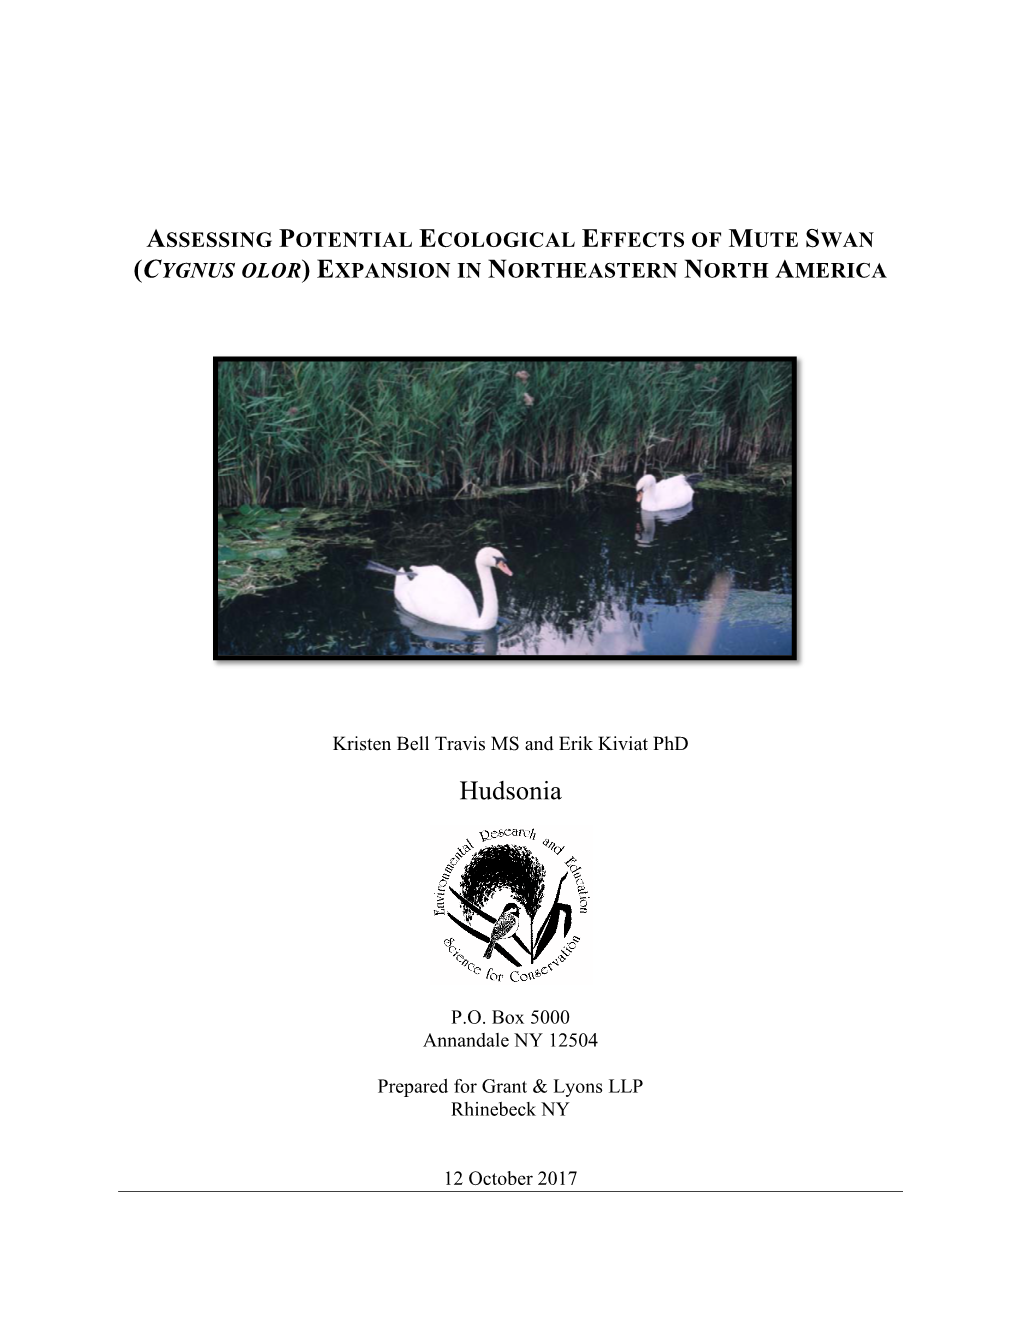 Assessing Potential Ecological Effects of Mute Swan (Cygnus Olor) Expansion in Northeastern North America